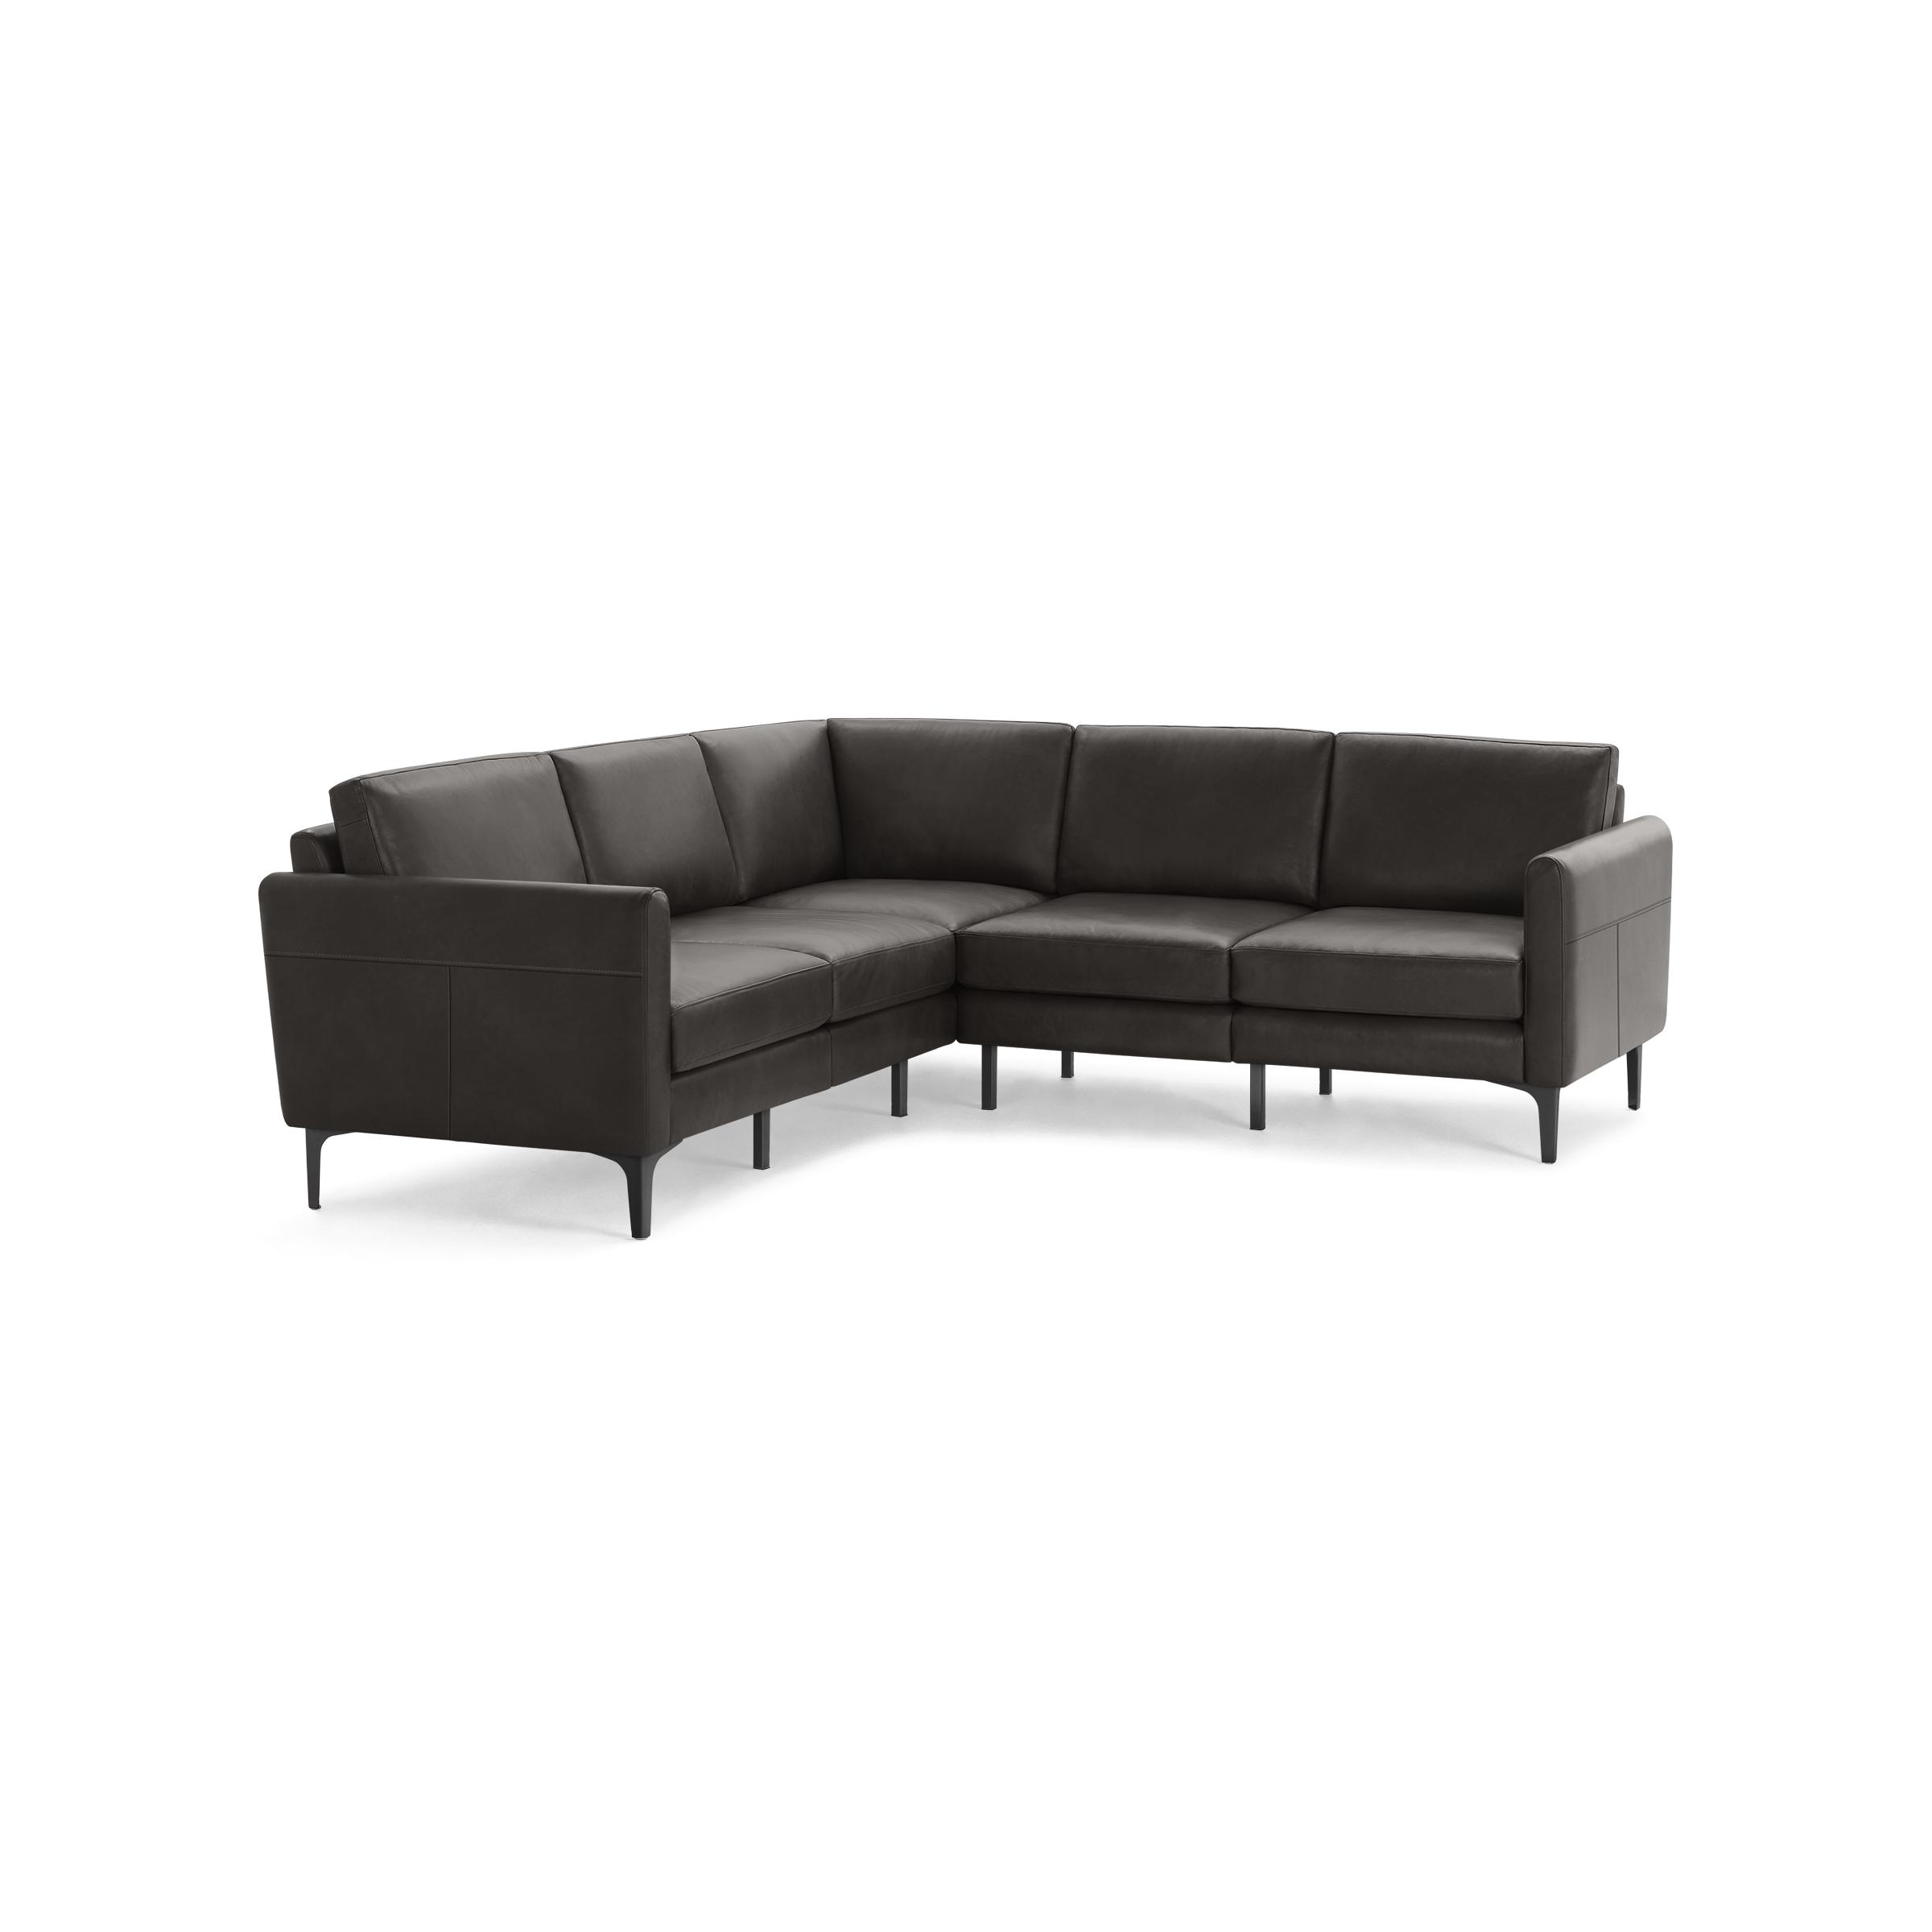 The Arch Nomad Leather 5-Seat Corner Sectional in Slate - Image 1